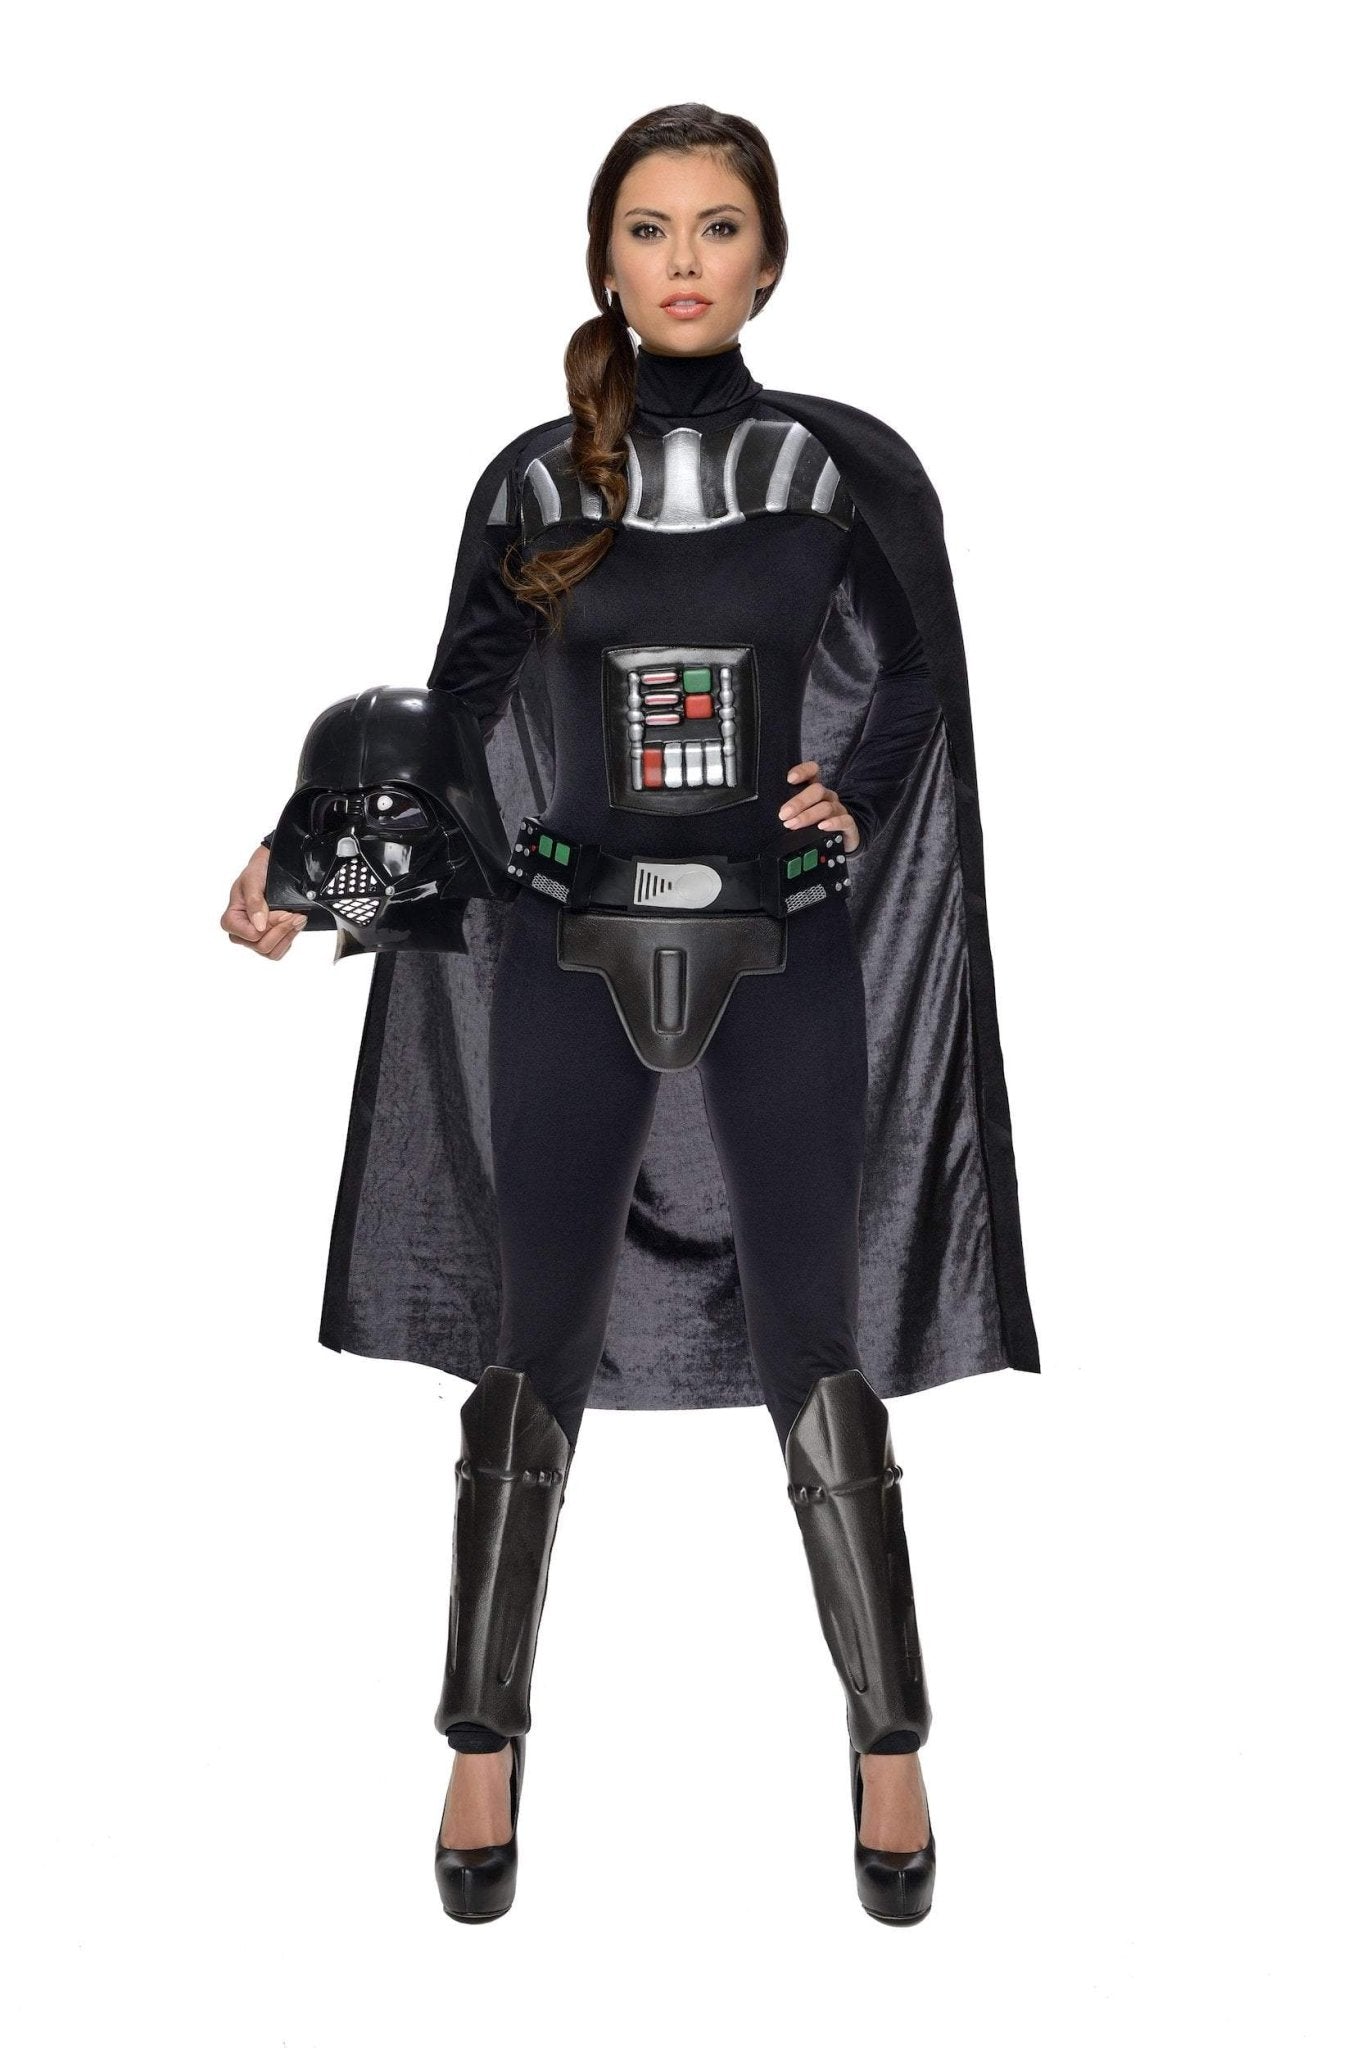 Adult Female Darth Vader Costume - Star Wars - JJ's Party House